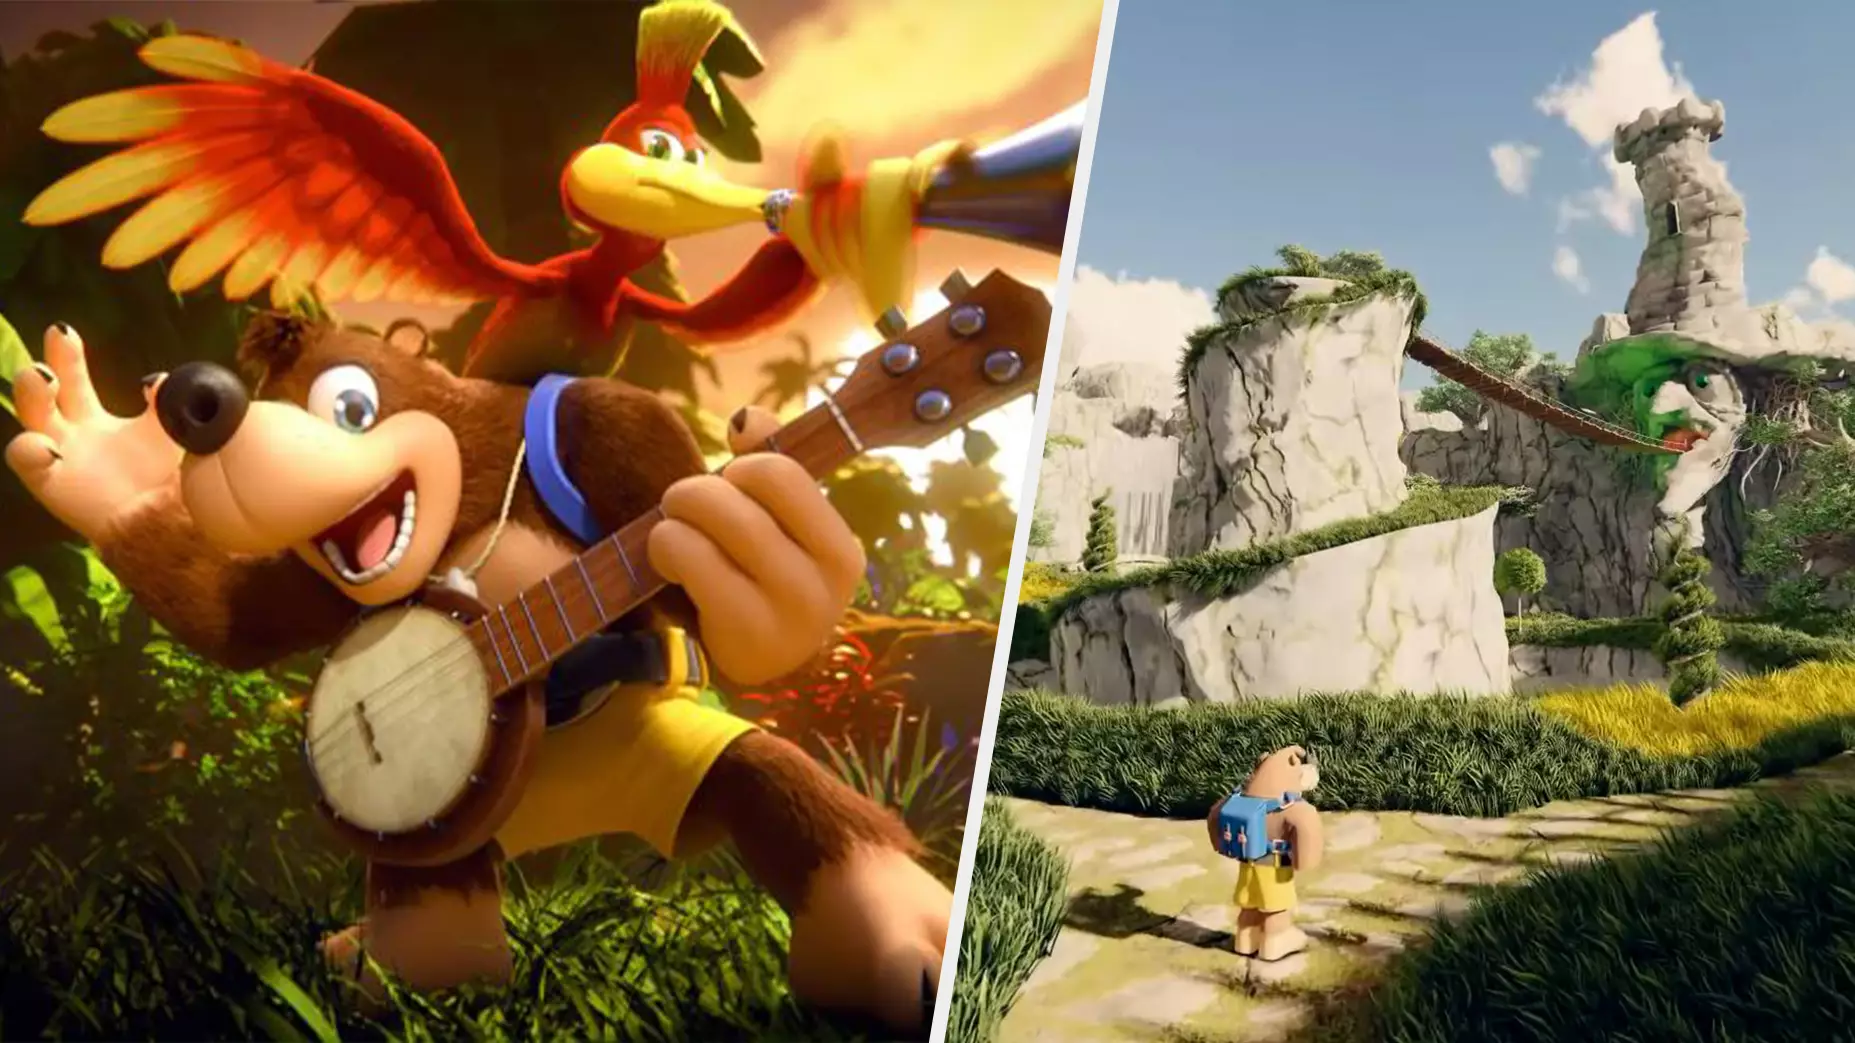 This 'Banjo-Kazooie' Remake Is A Childhood Dream Come True